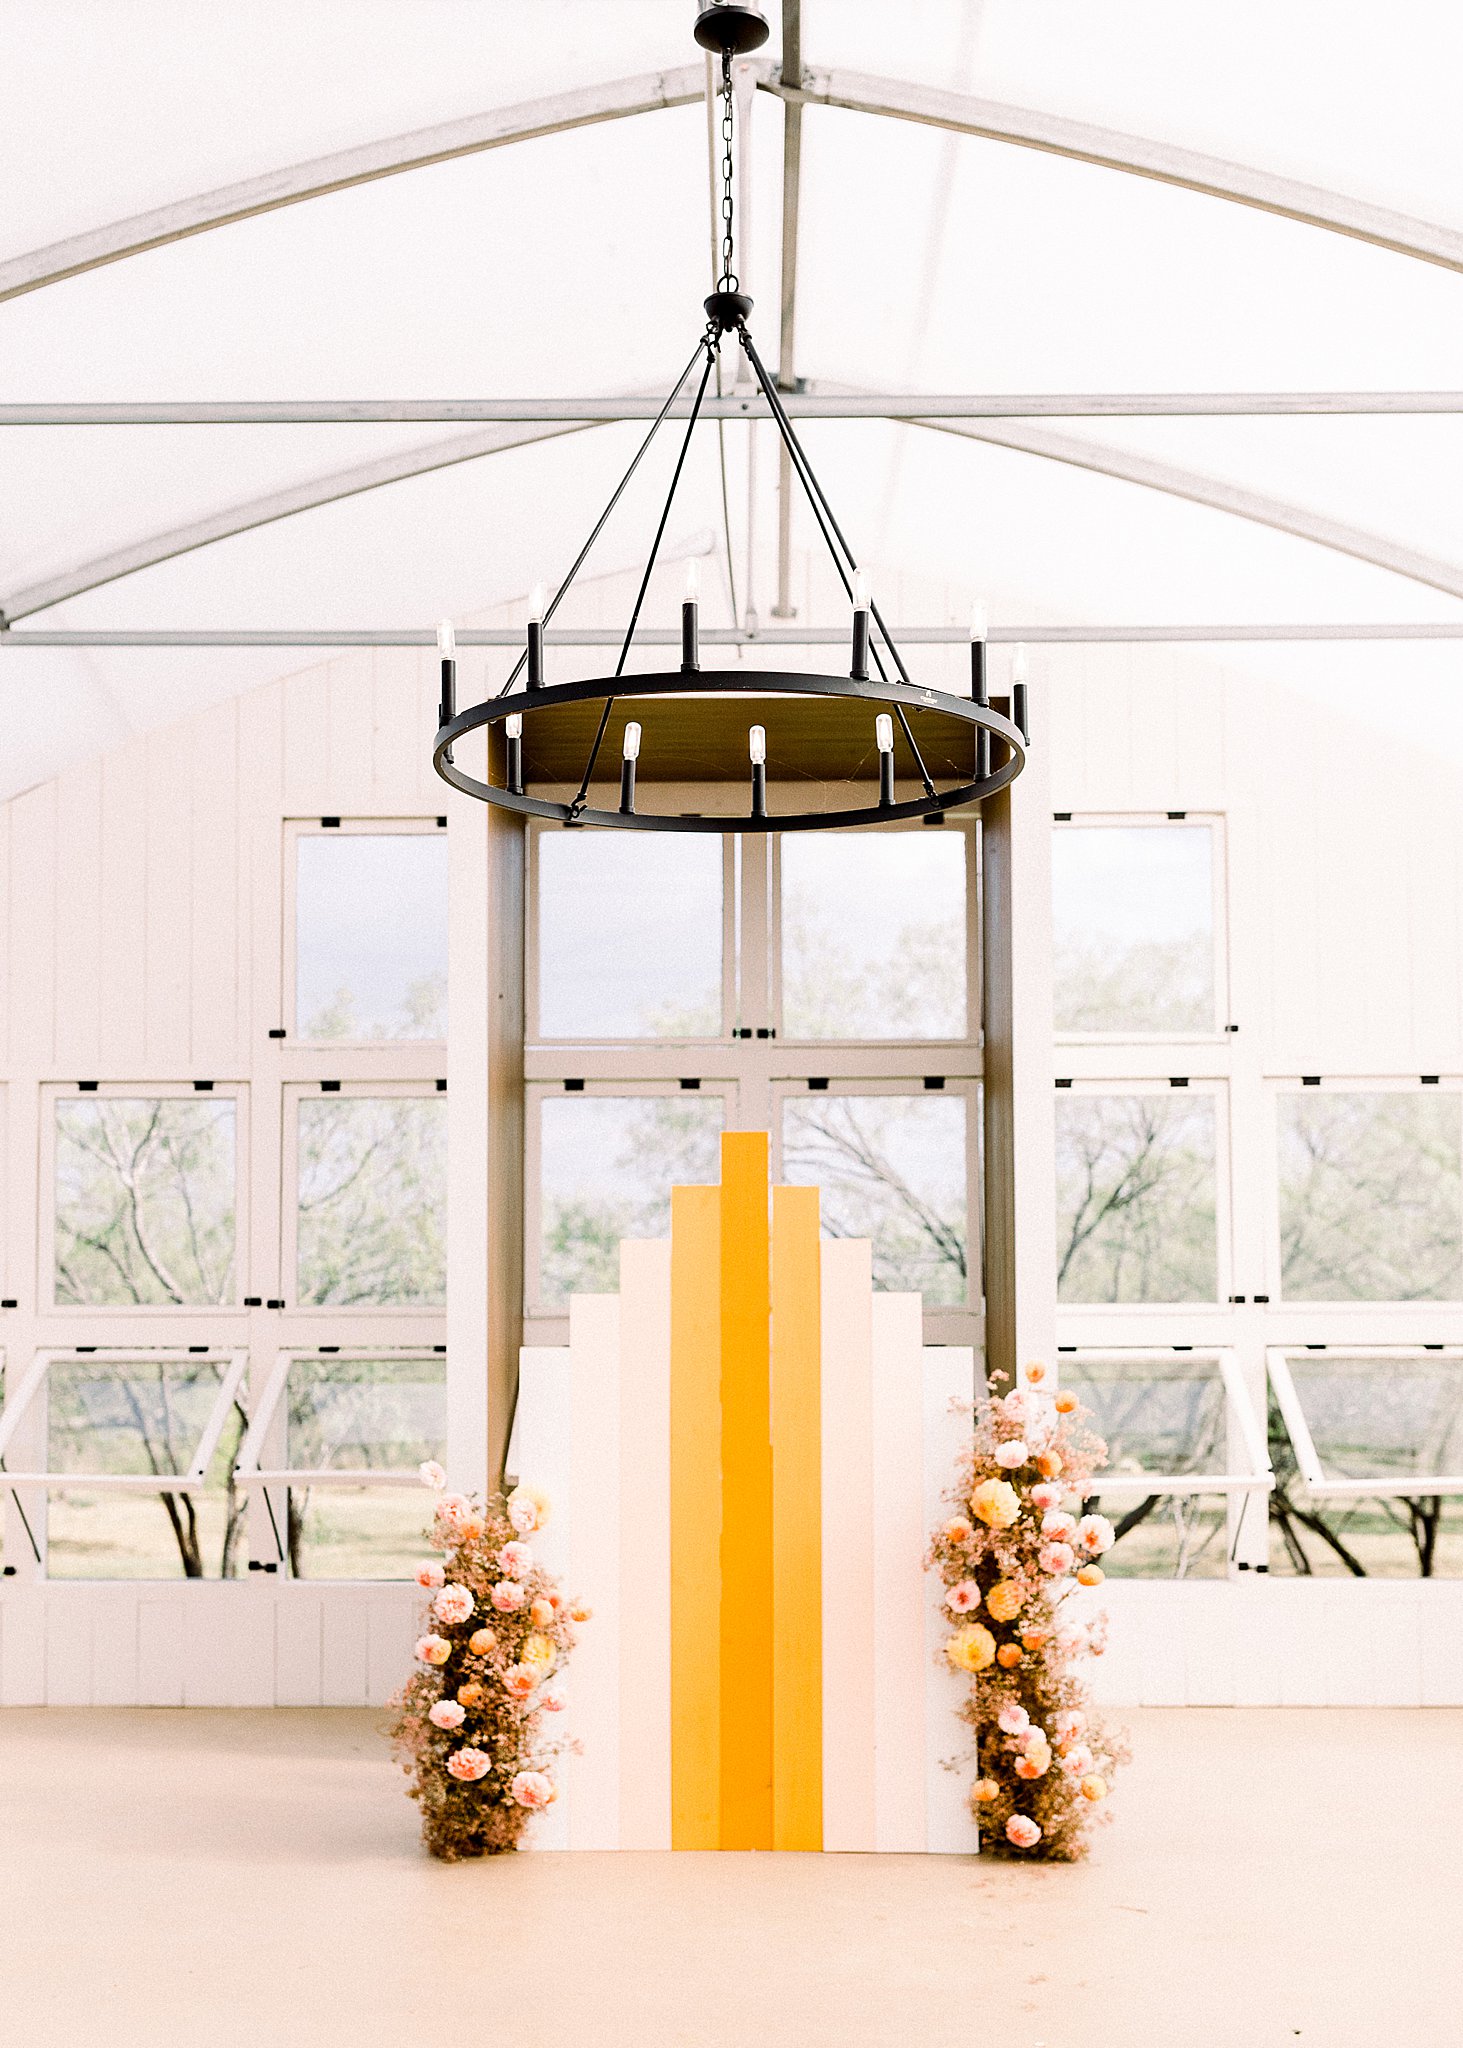 Camino Real Ranch Venue Chandelier Anna Kay Photography